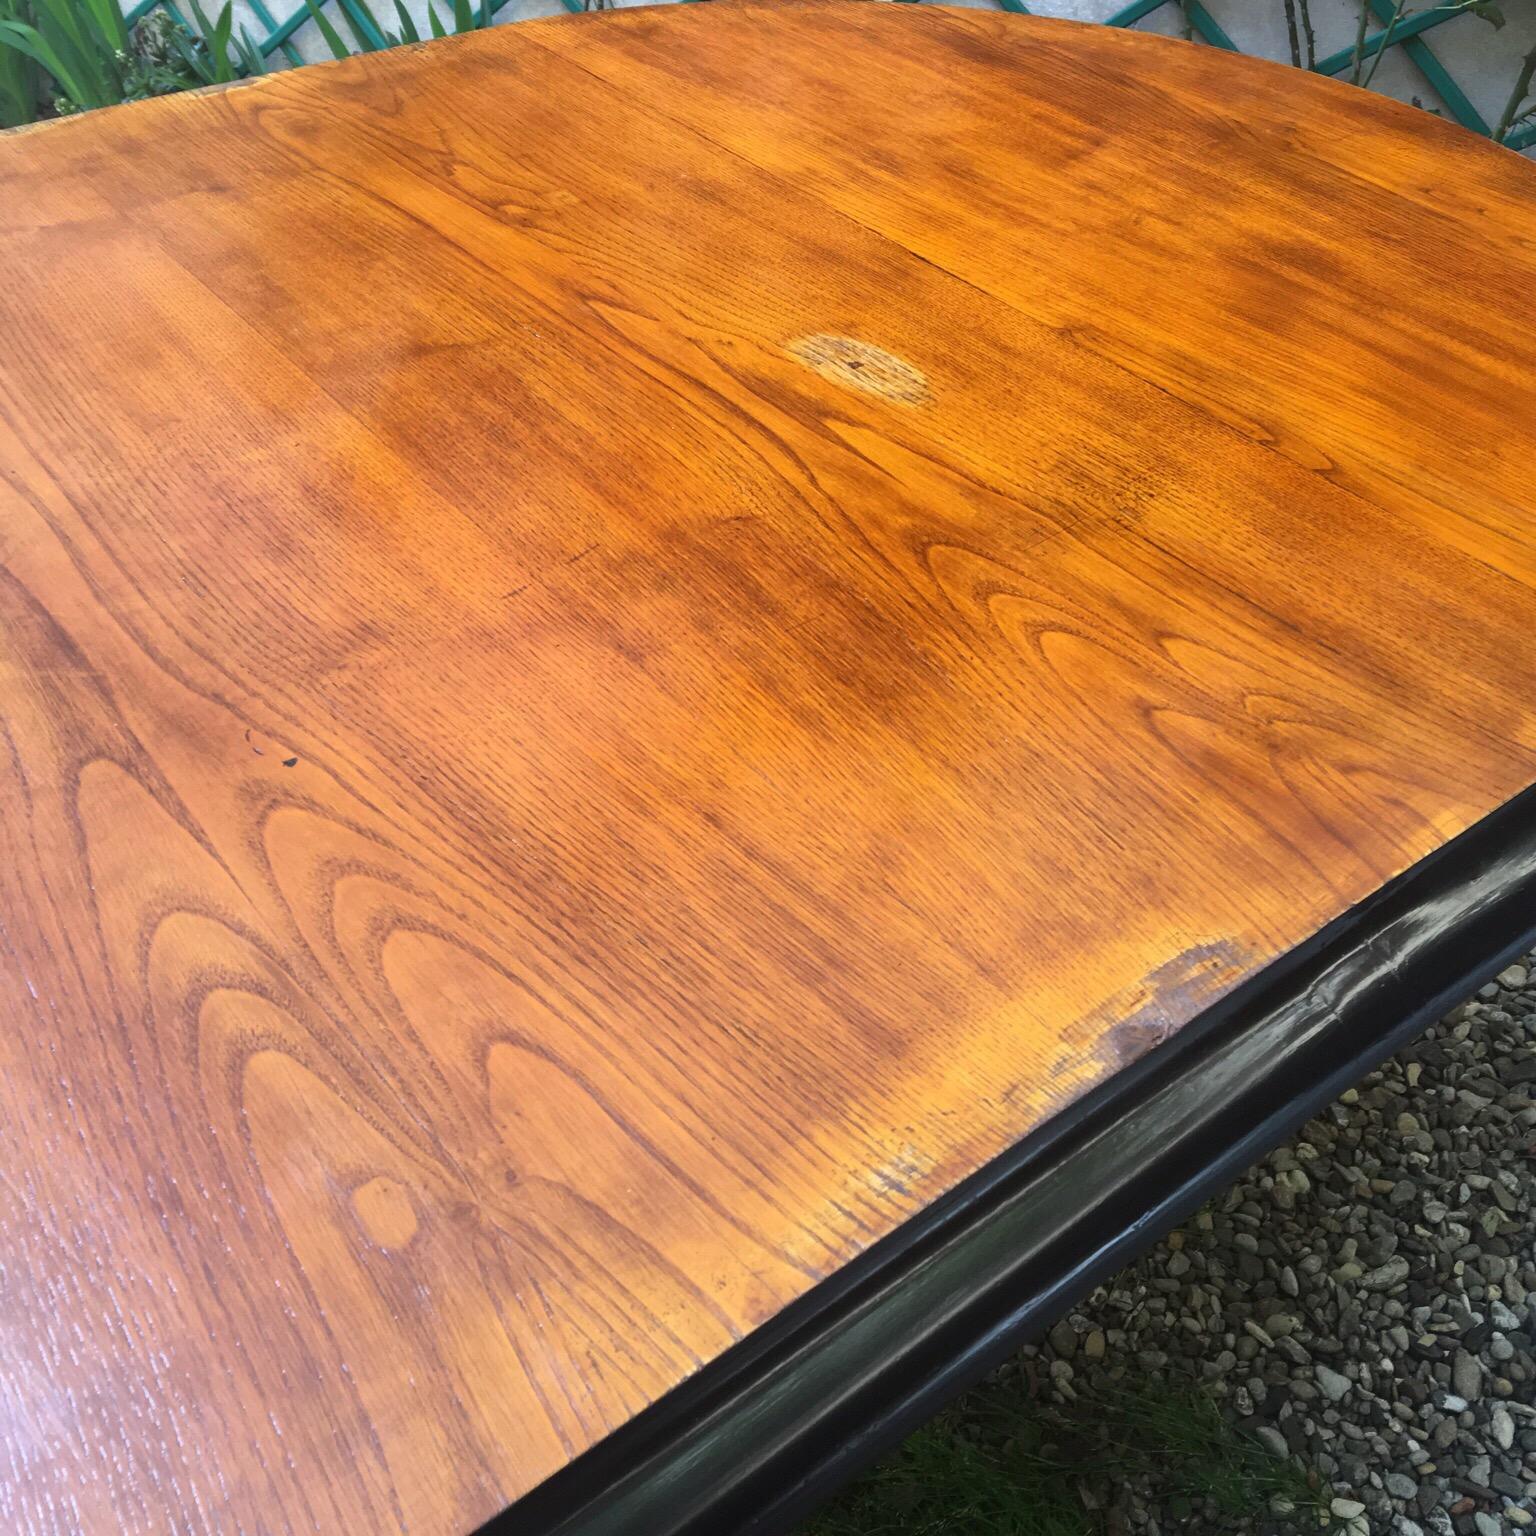 Art Deco Oval Dining Table in Mahogany Wood with Black Ebonized Edge, 1940s For Sale 8